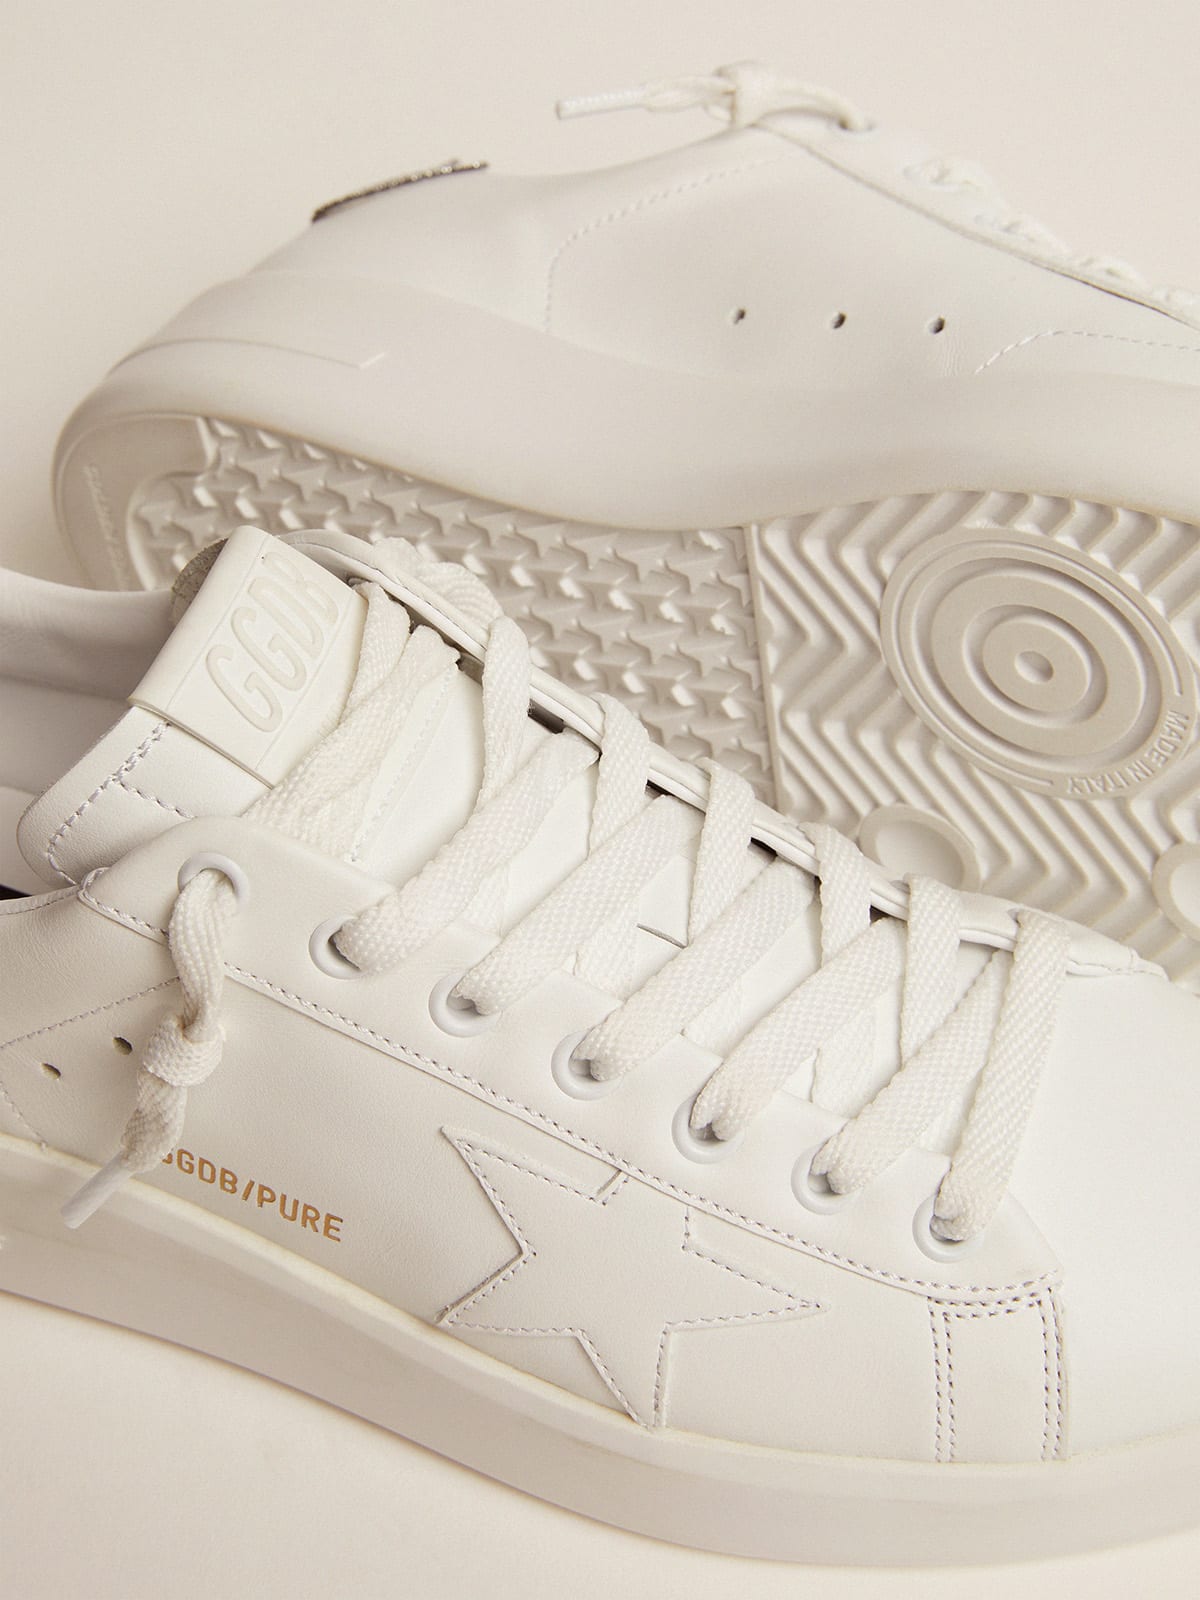 Golden Goose - Purestar sneakers in white leather with silver crystal heel tab in 